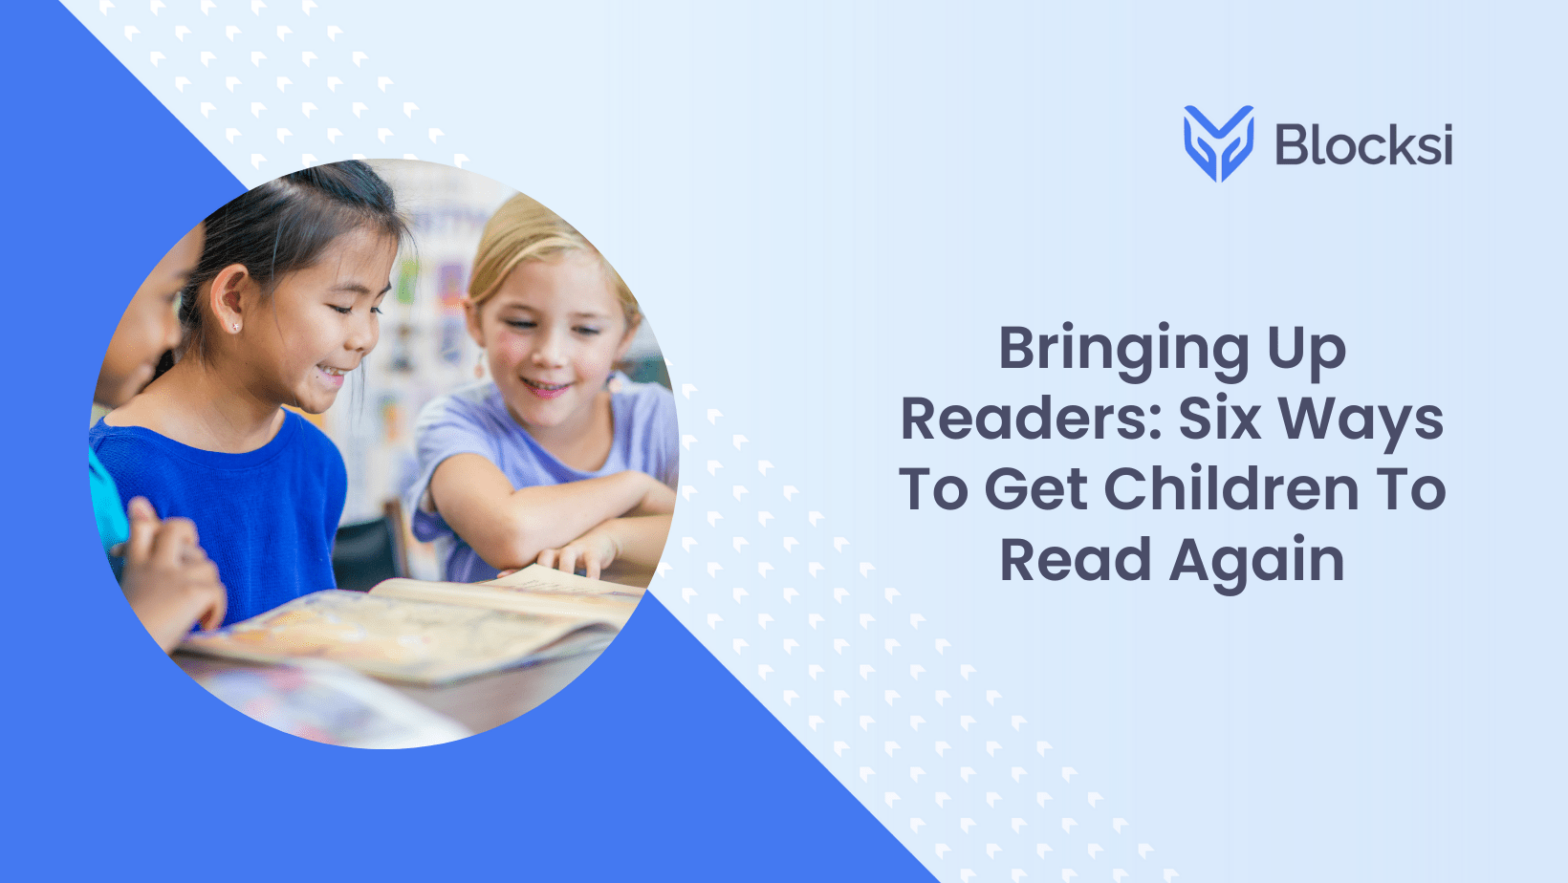 Bringing Up Readers: Six Ways To Get Children To Read Again